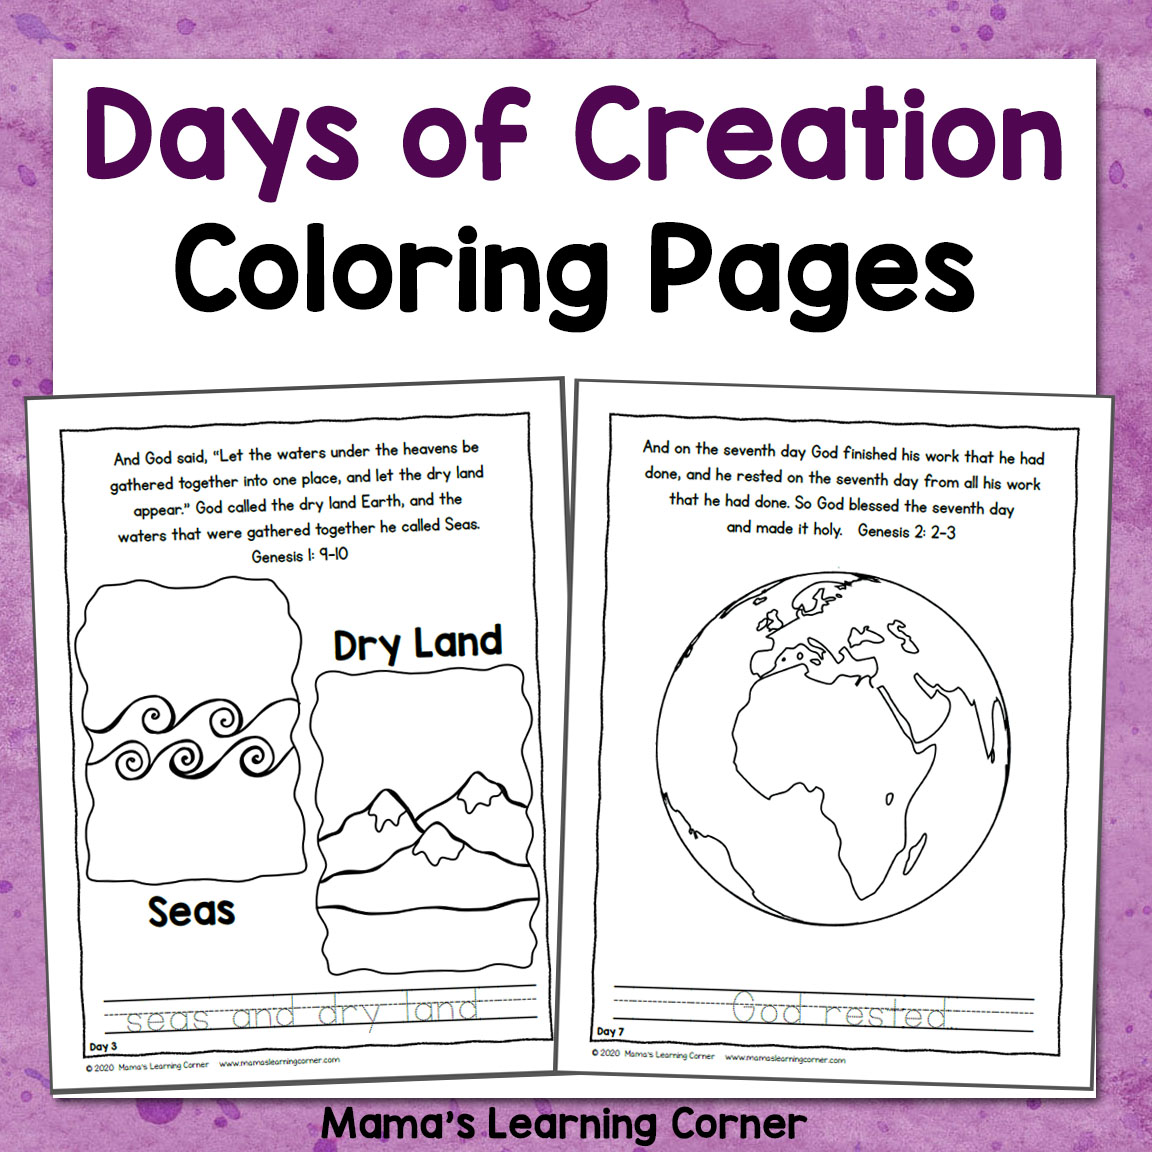 Days of Creation Coloring Pages